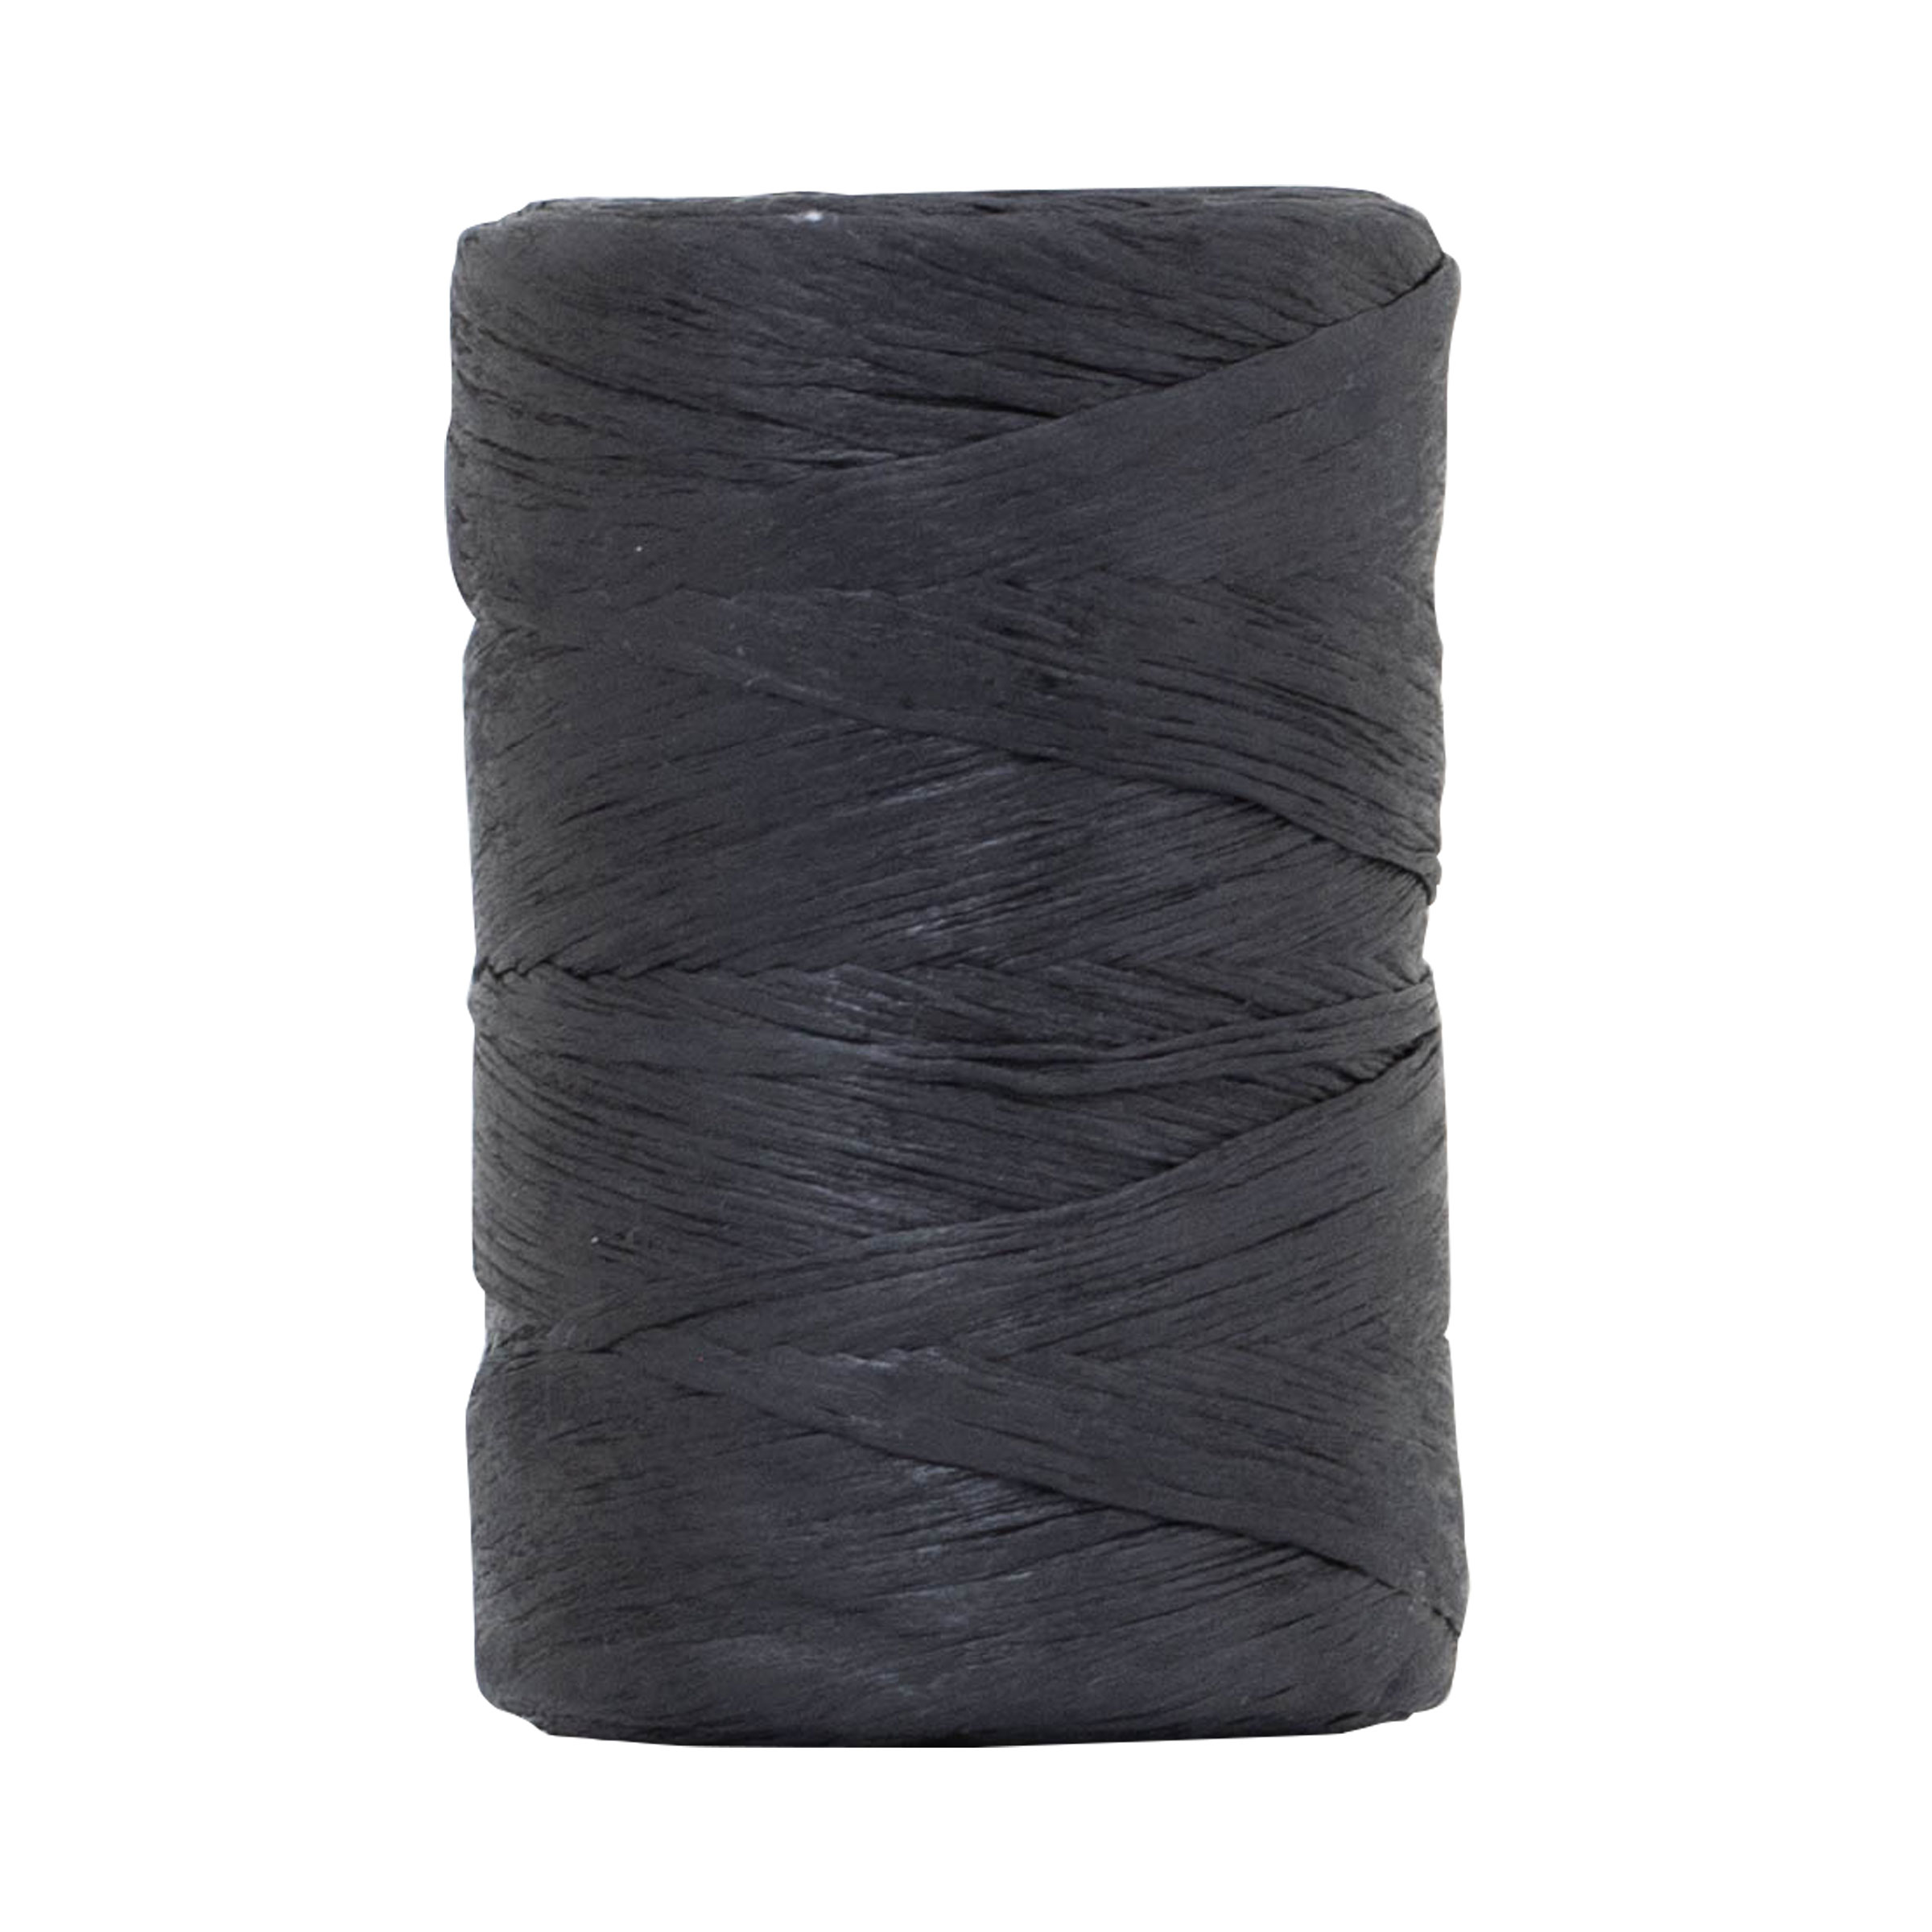 Blue Water Candy Rigging Floss 1/2 LB Spool - Black